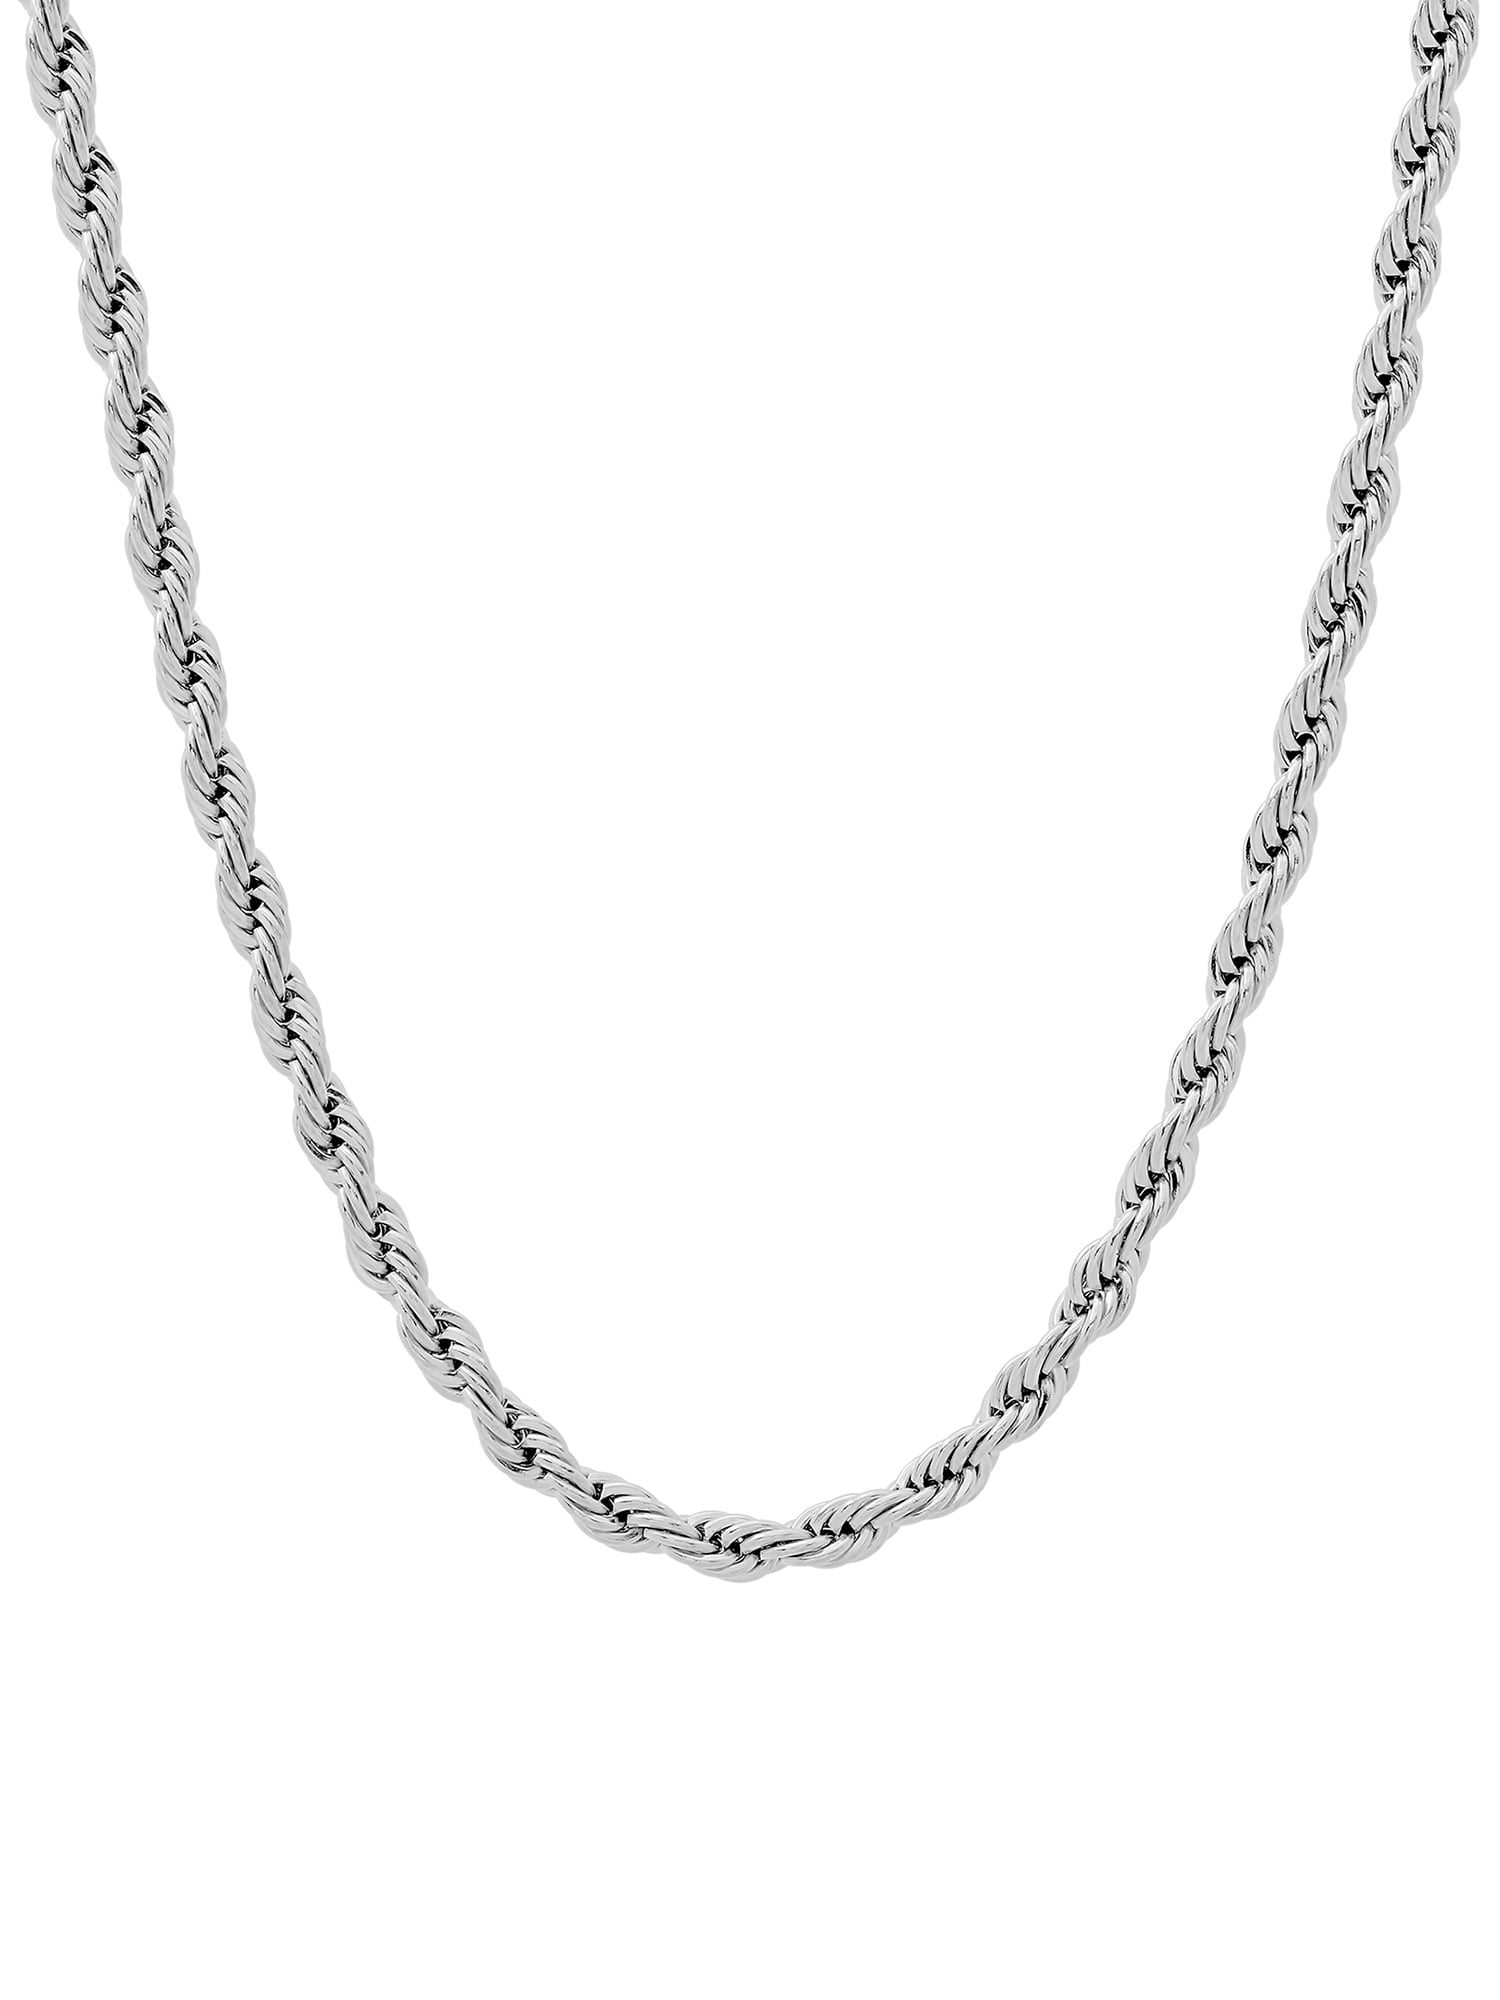 Men S Stainless Steel Rope Chain, Silver